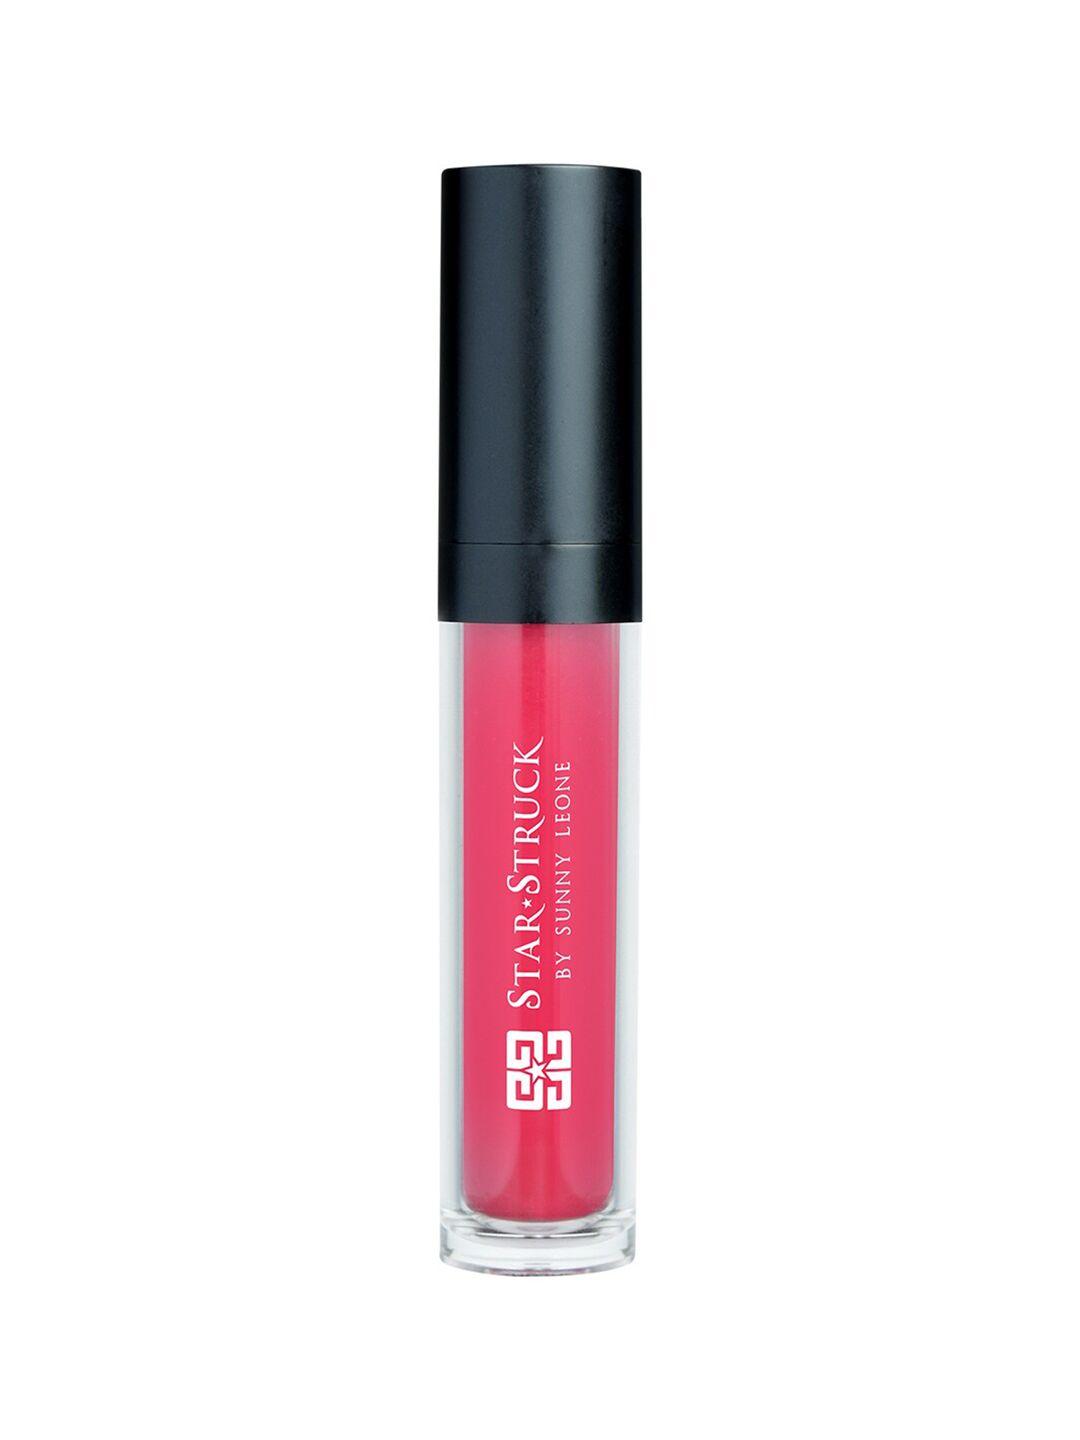 star struck by sunny leone hydrating lip tint with hyaluronic acid 6ml - pink passion